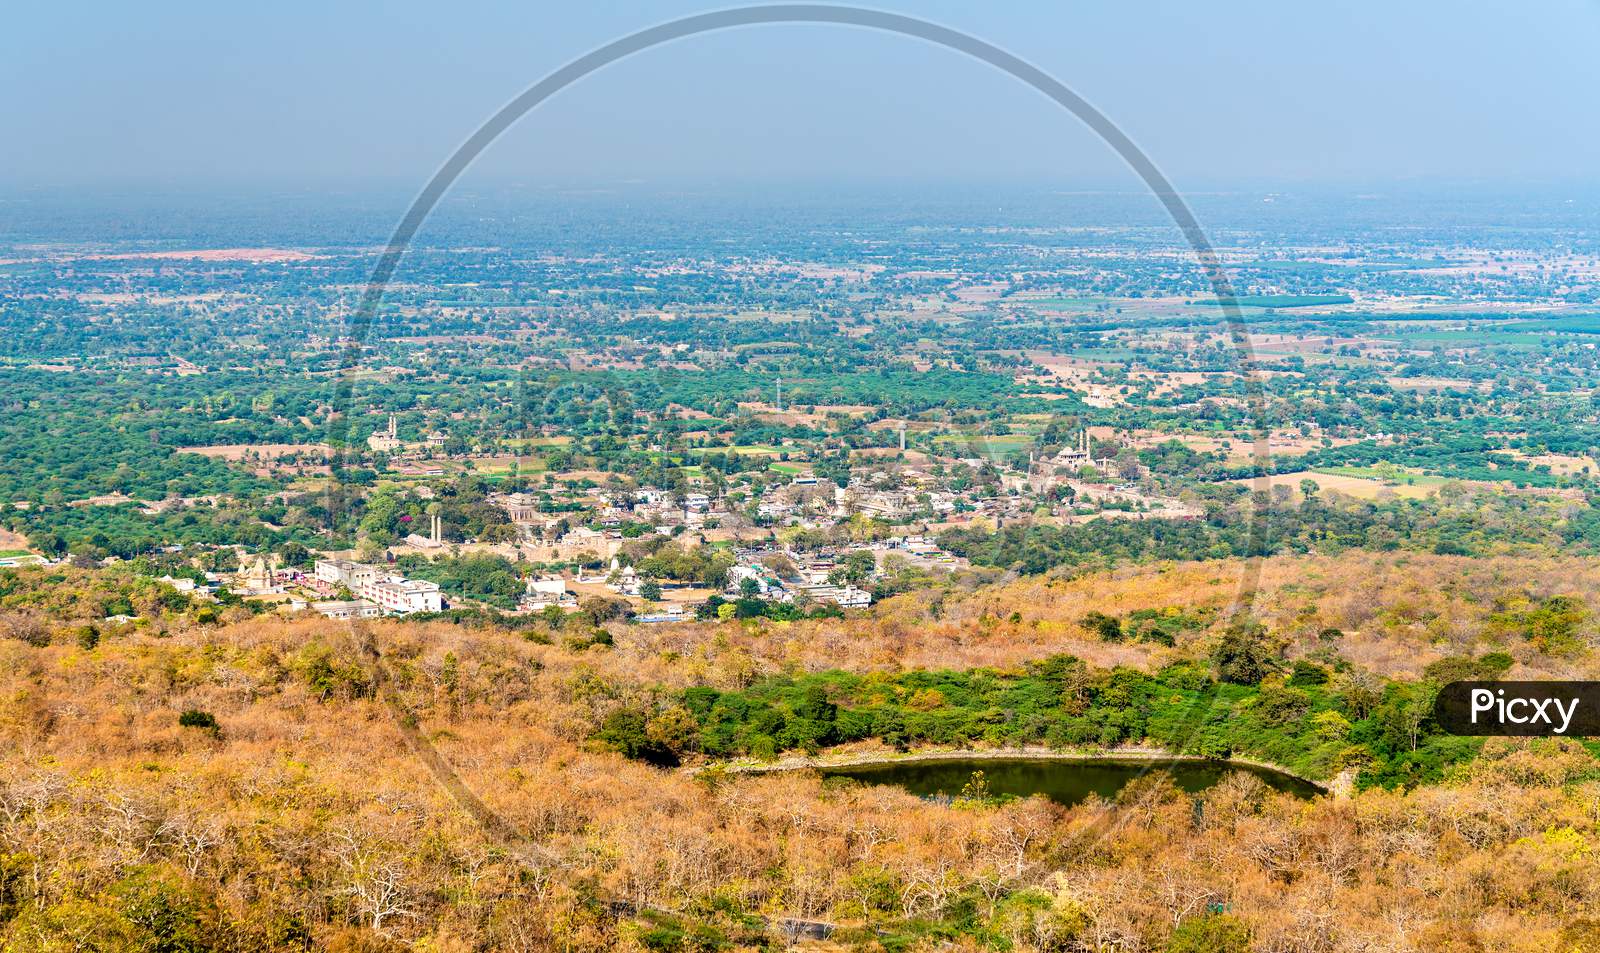 Panorama of Champaner, a historical city in the state of Gujarat. A UNESCO world heritage site in western India